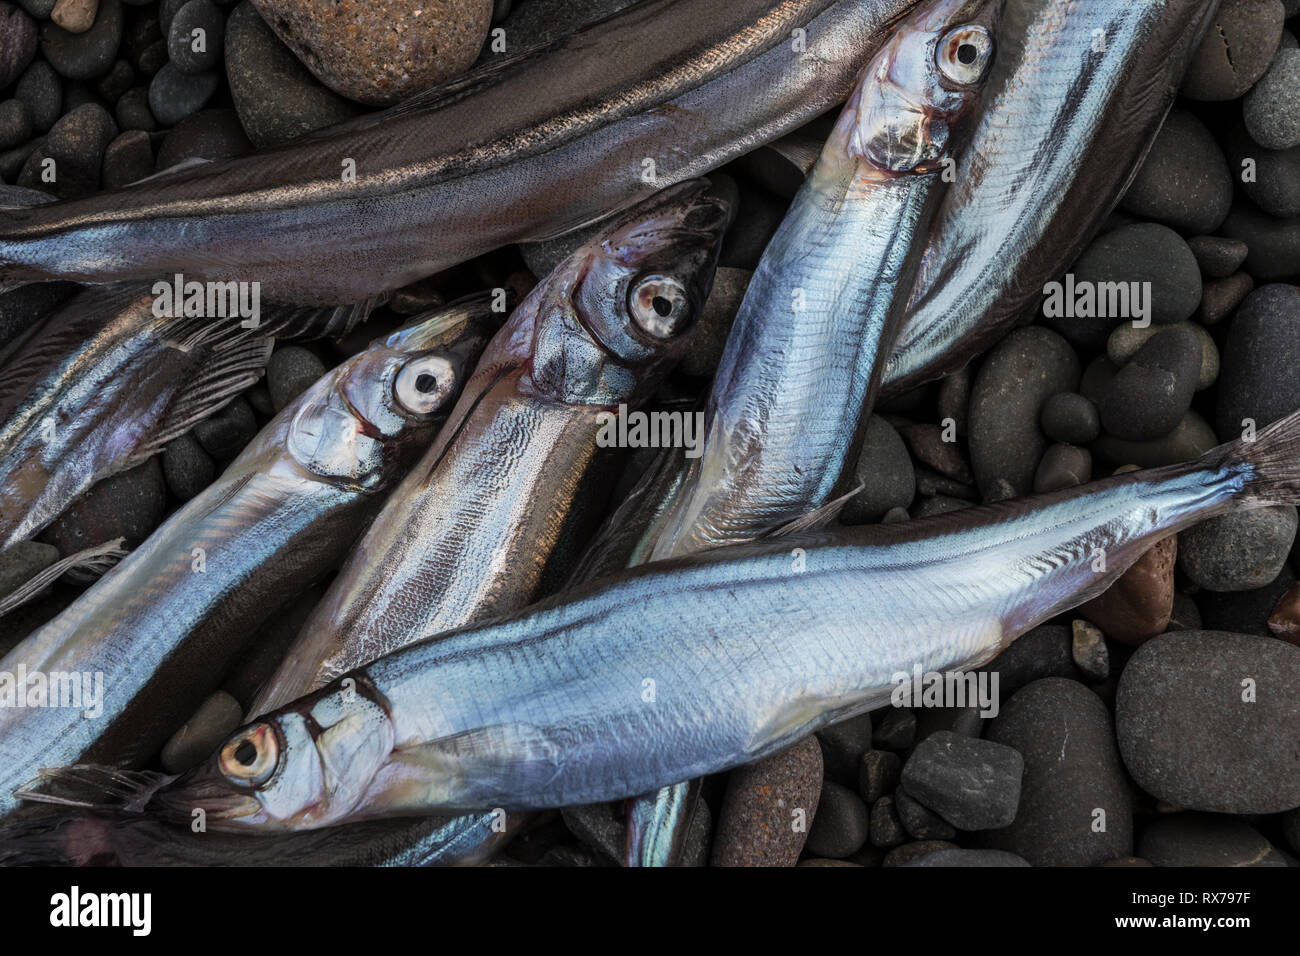 capelin washed up on the rocky beach, food for whales and seabirds, St. Vincent's beach, St. Vincent, Newfoundland, Canada Stock Photo